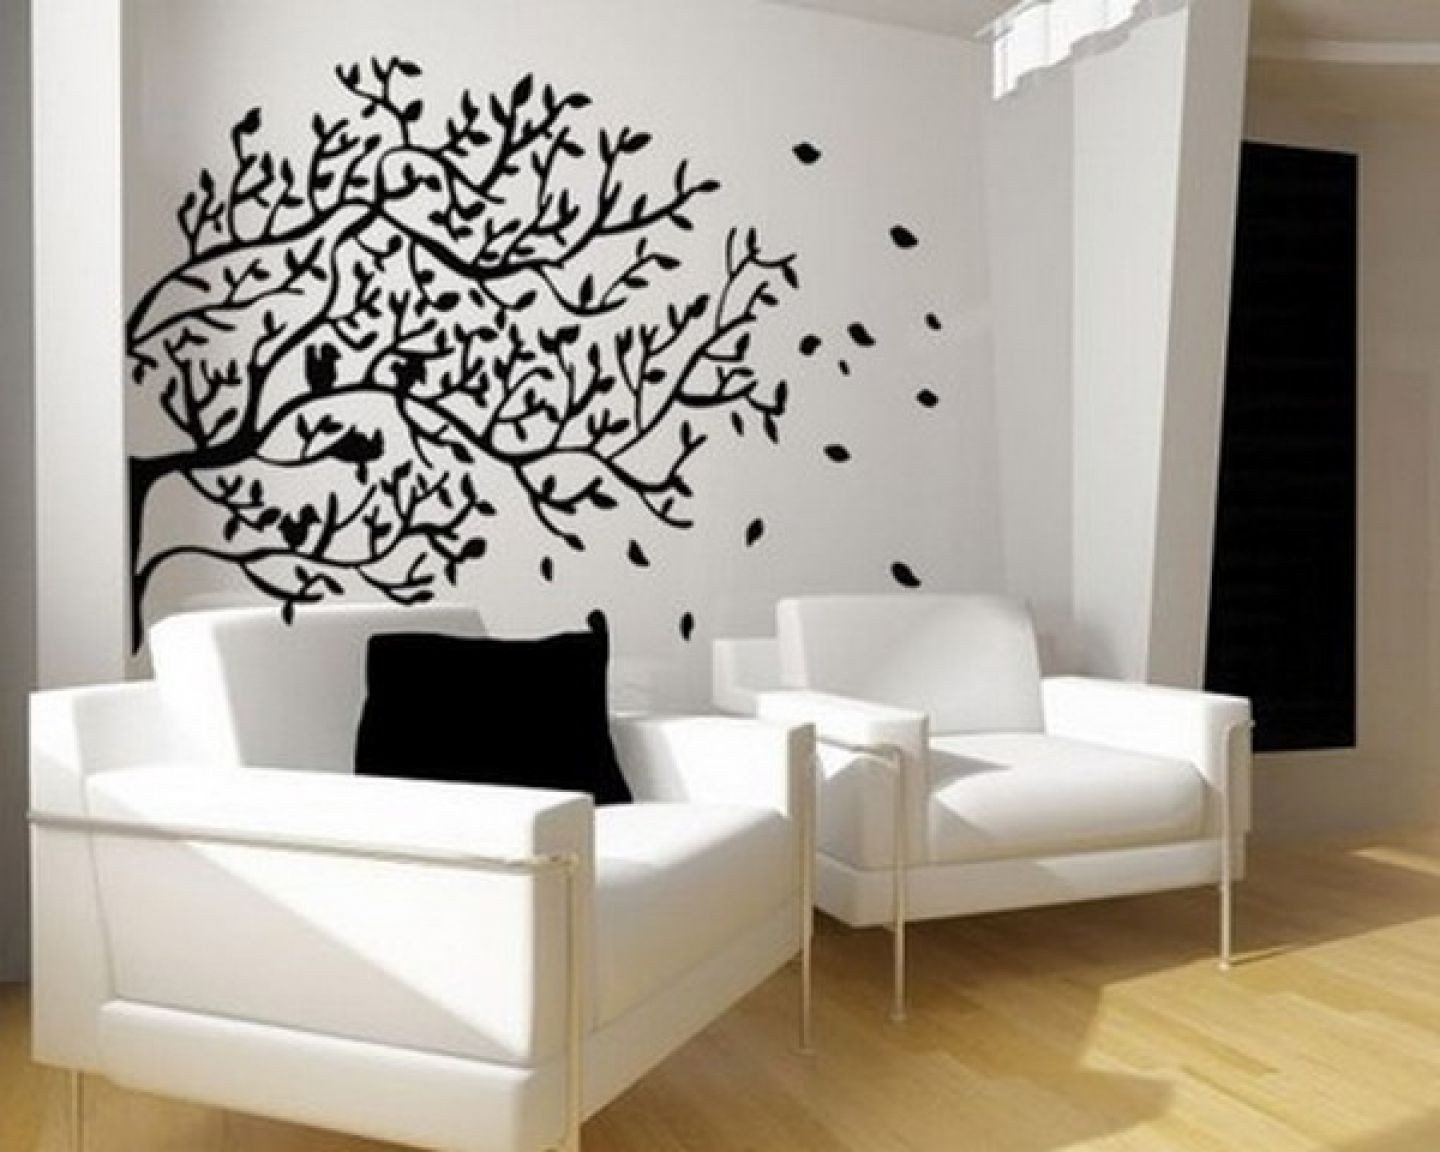 Bedroom Wall Art Stickers Lovely Luxury Living Room Tree Wall Murals Sticker Decorations